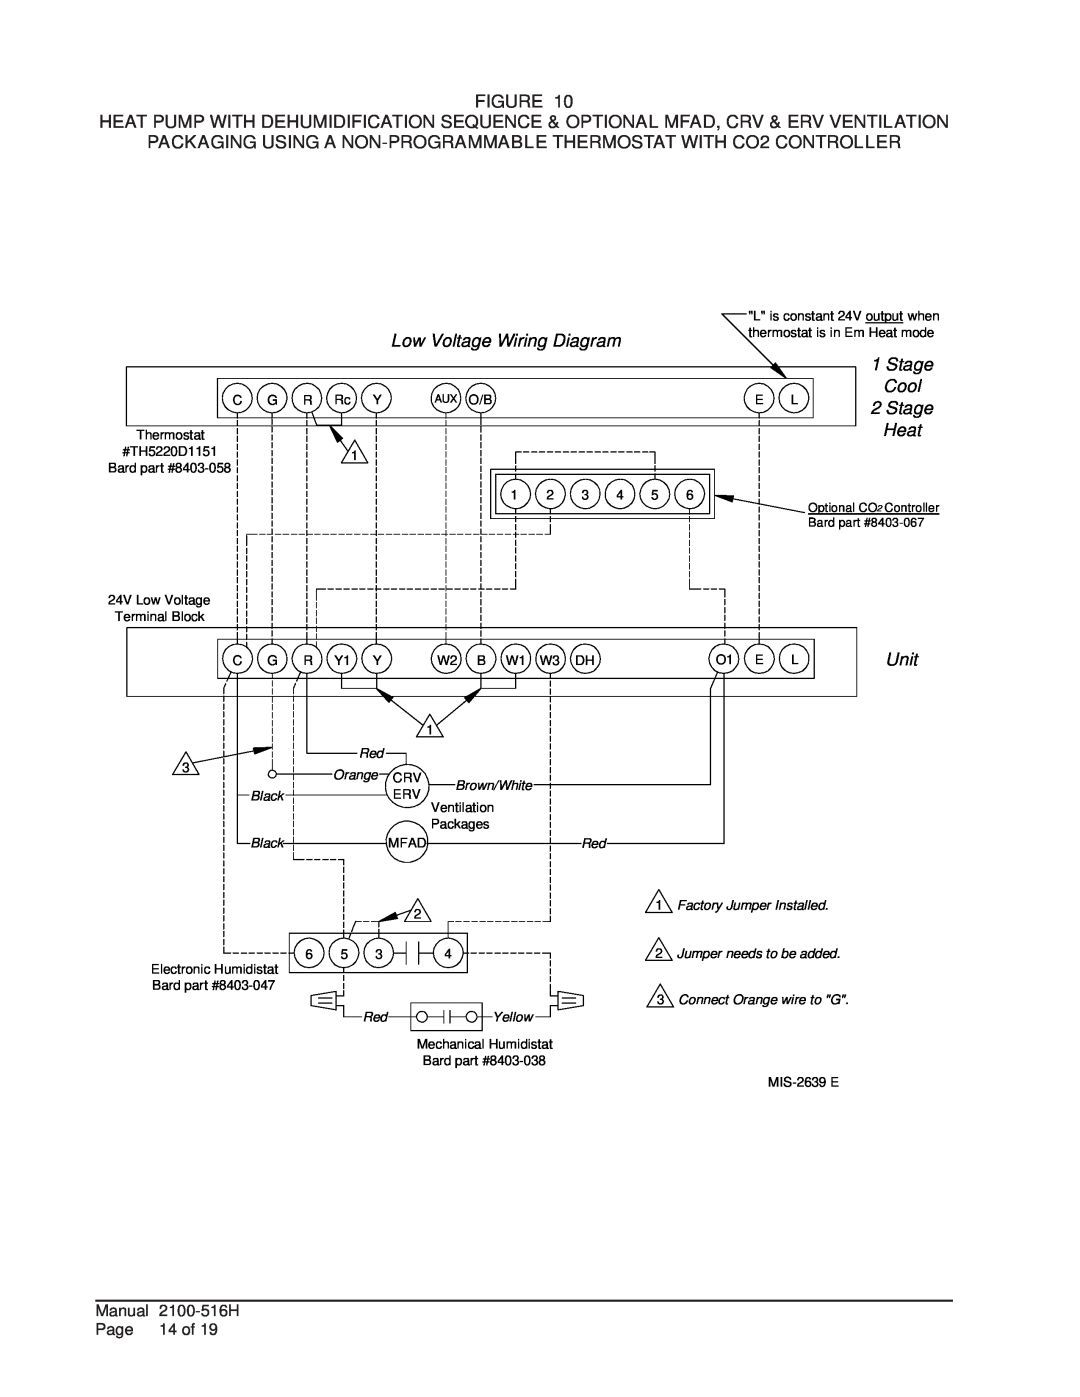 Bard S**H*D, W**H*D, T**H*D installation instructions Low Voltage Wiring Diagram, Stage Cool E L 2 Stage Heat, Unit 